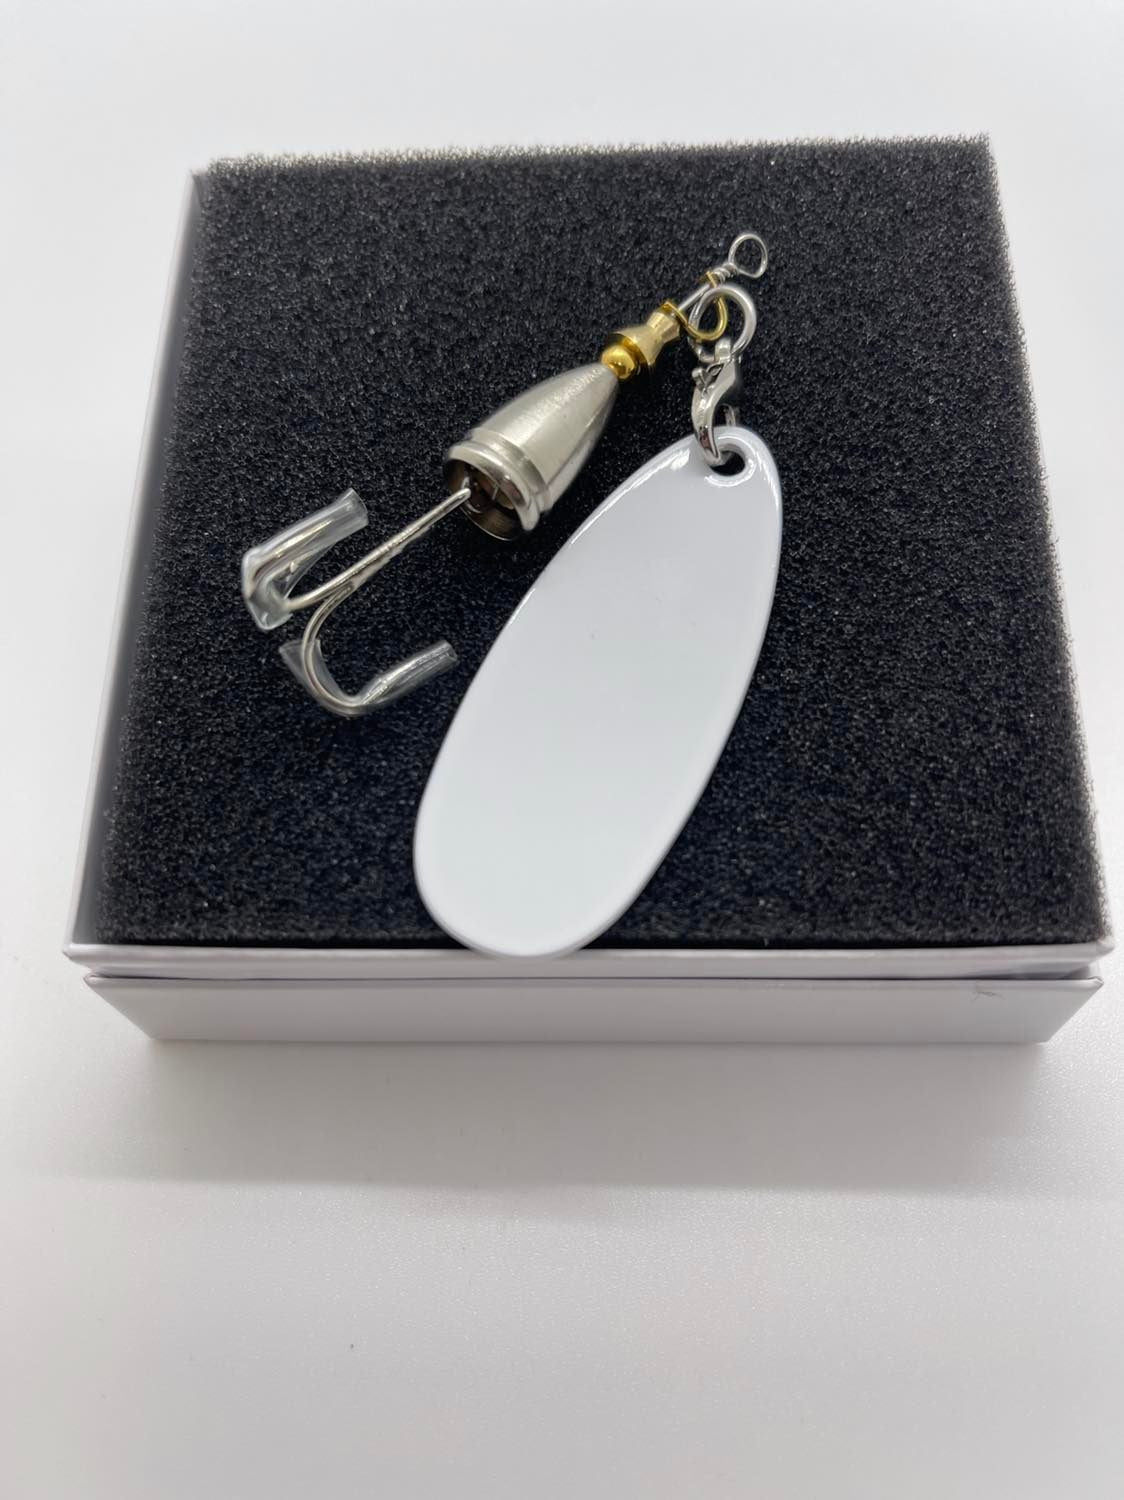 Fathers Day/Sublimation Fishing Lure – Creative Touch Gifts Inc.